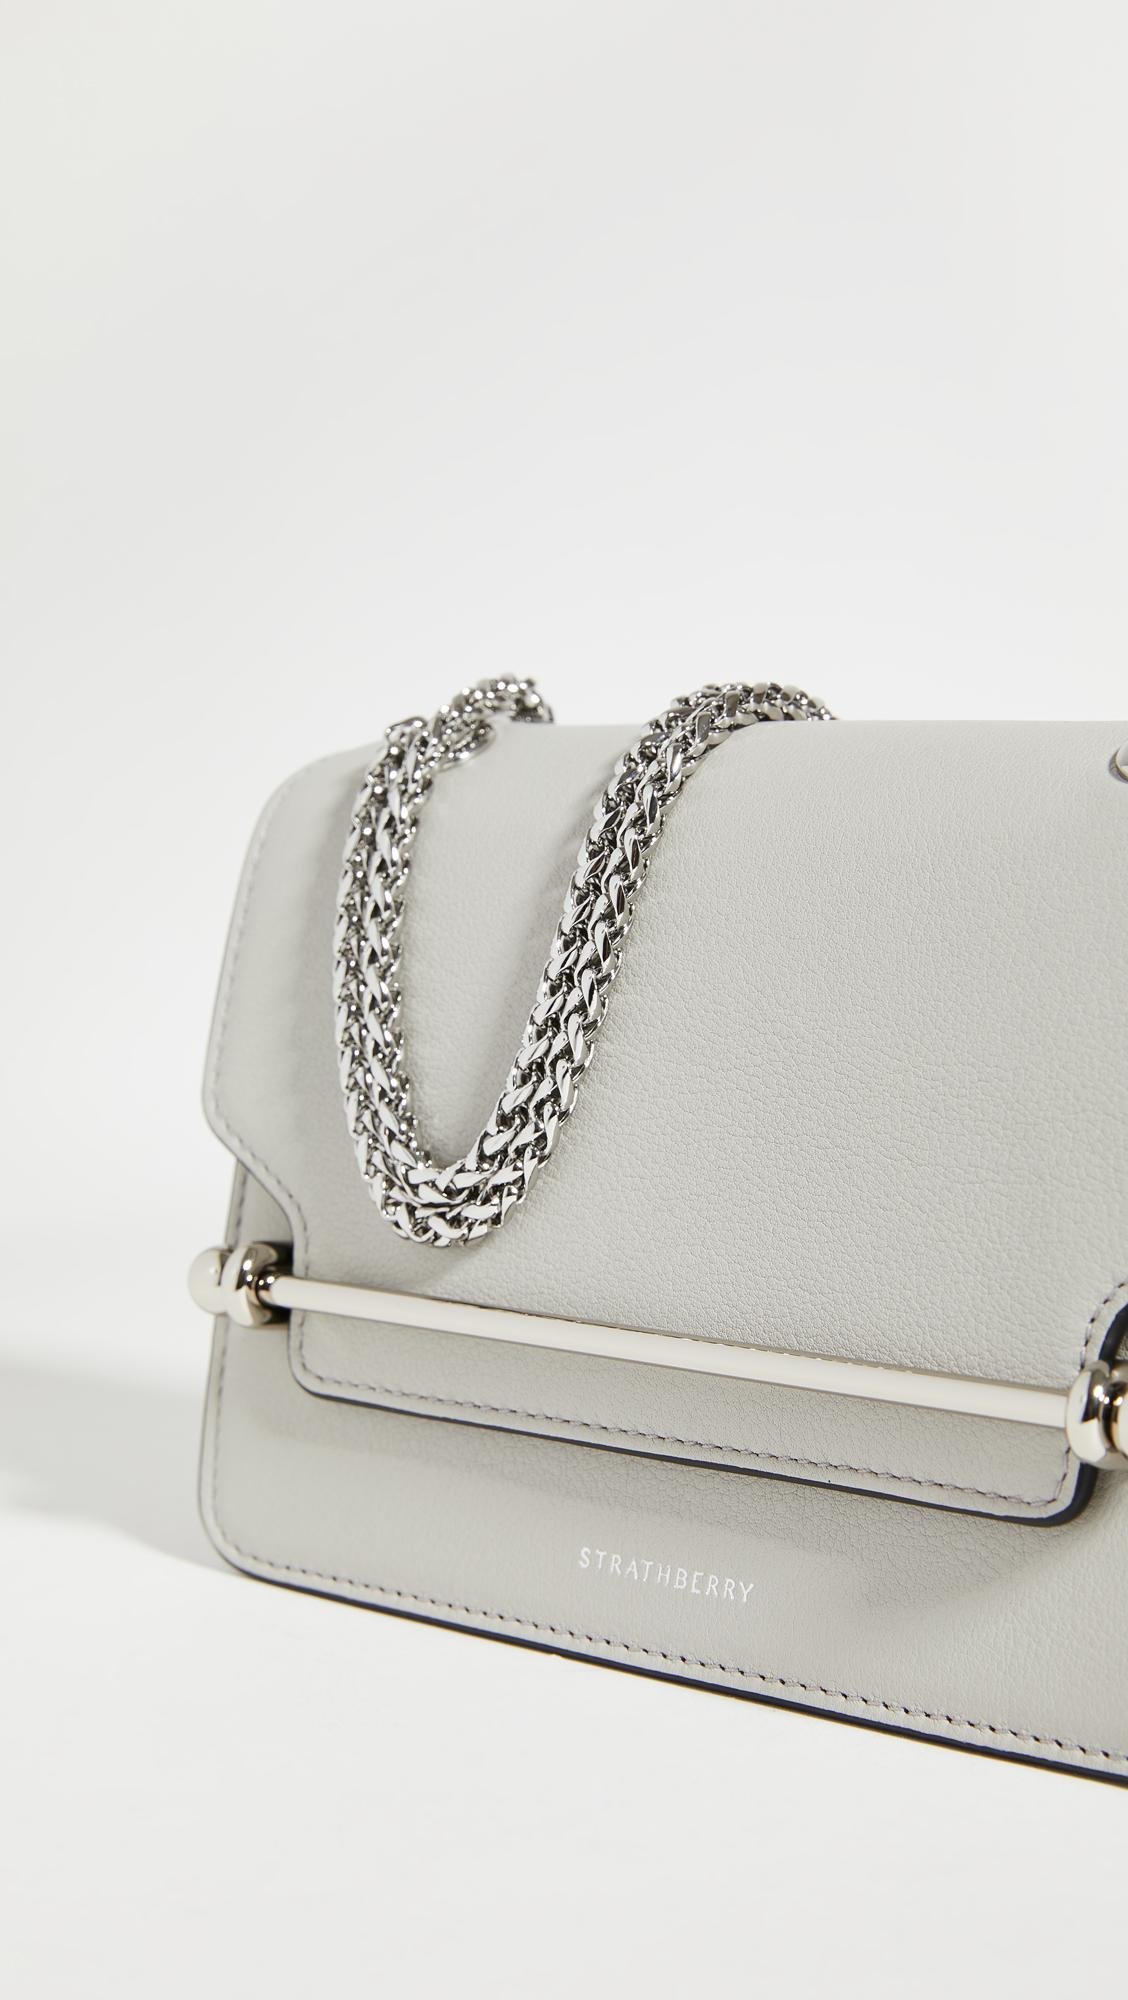 Strathberry, Bags, Strathberry The Strathberry Midi Tote In Pearl Grey